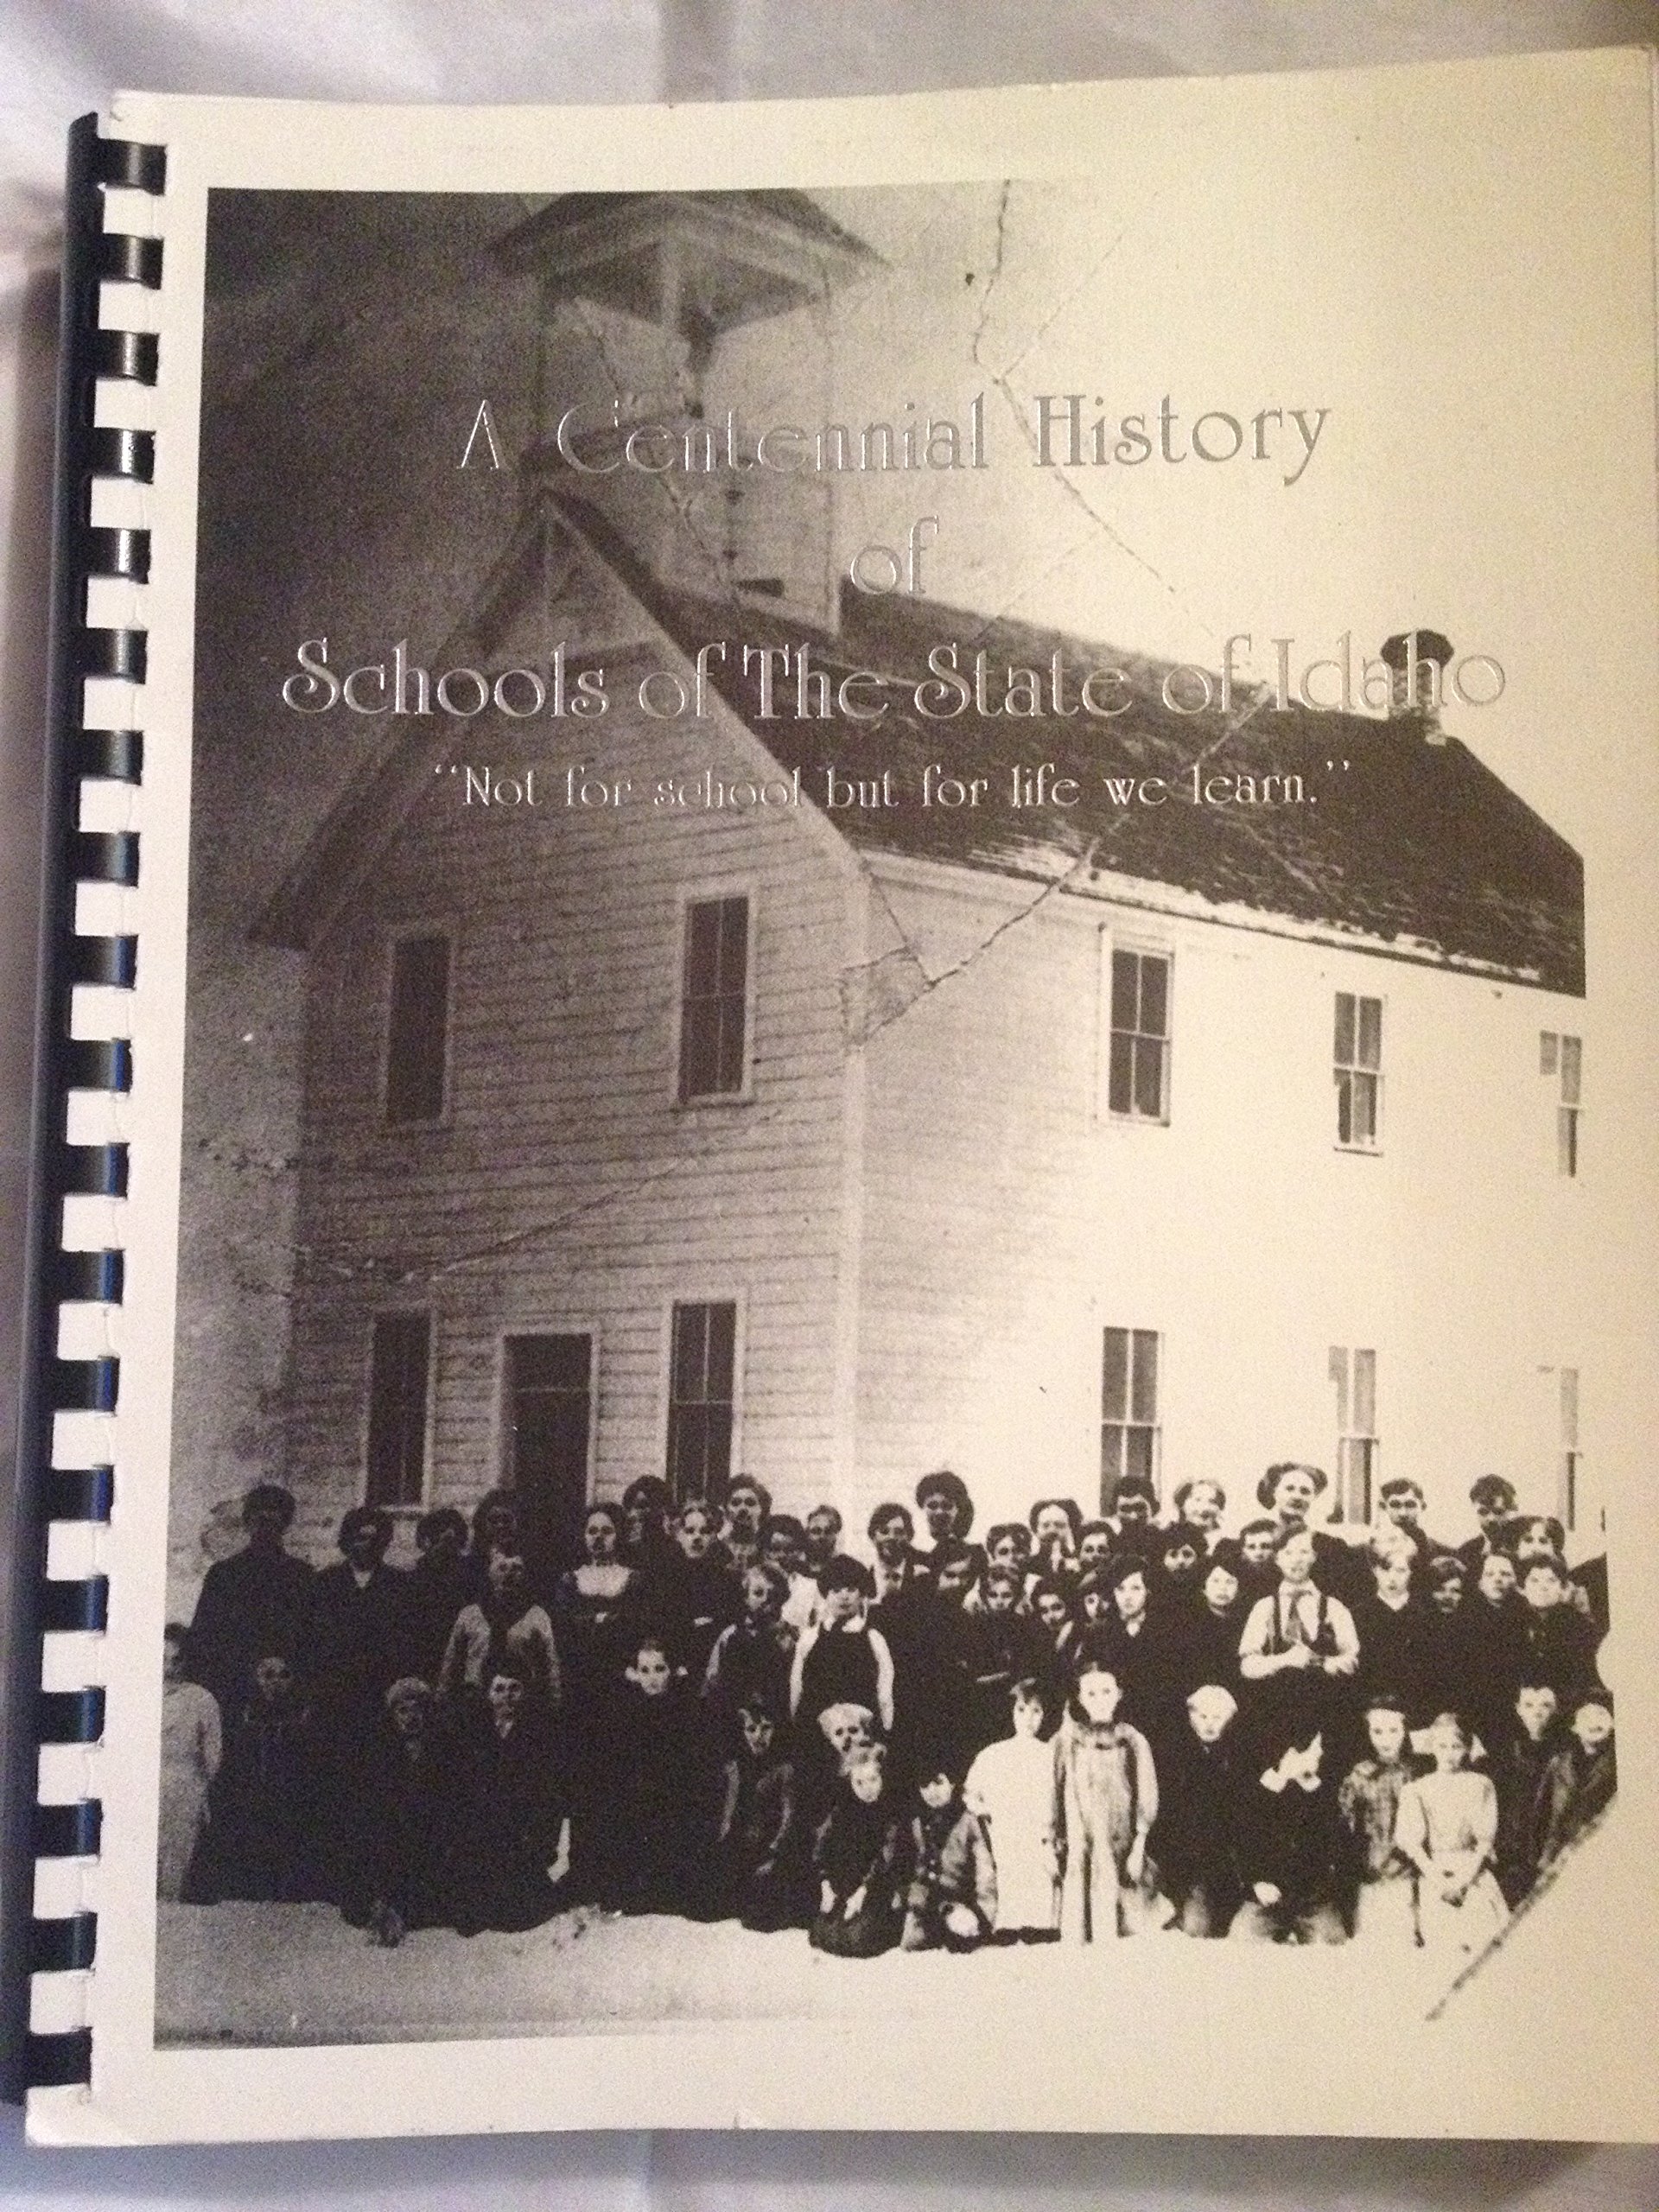 A centennial history of schools of the state of Idaho (book cover)